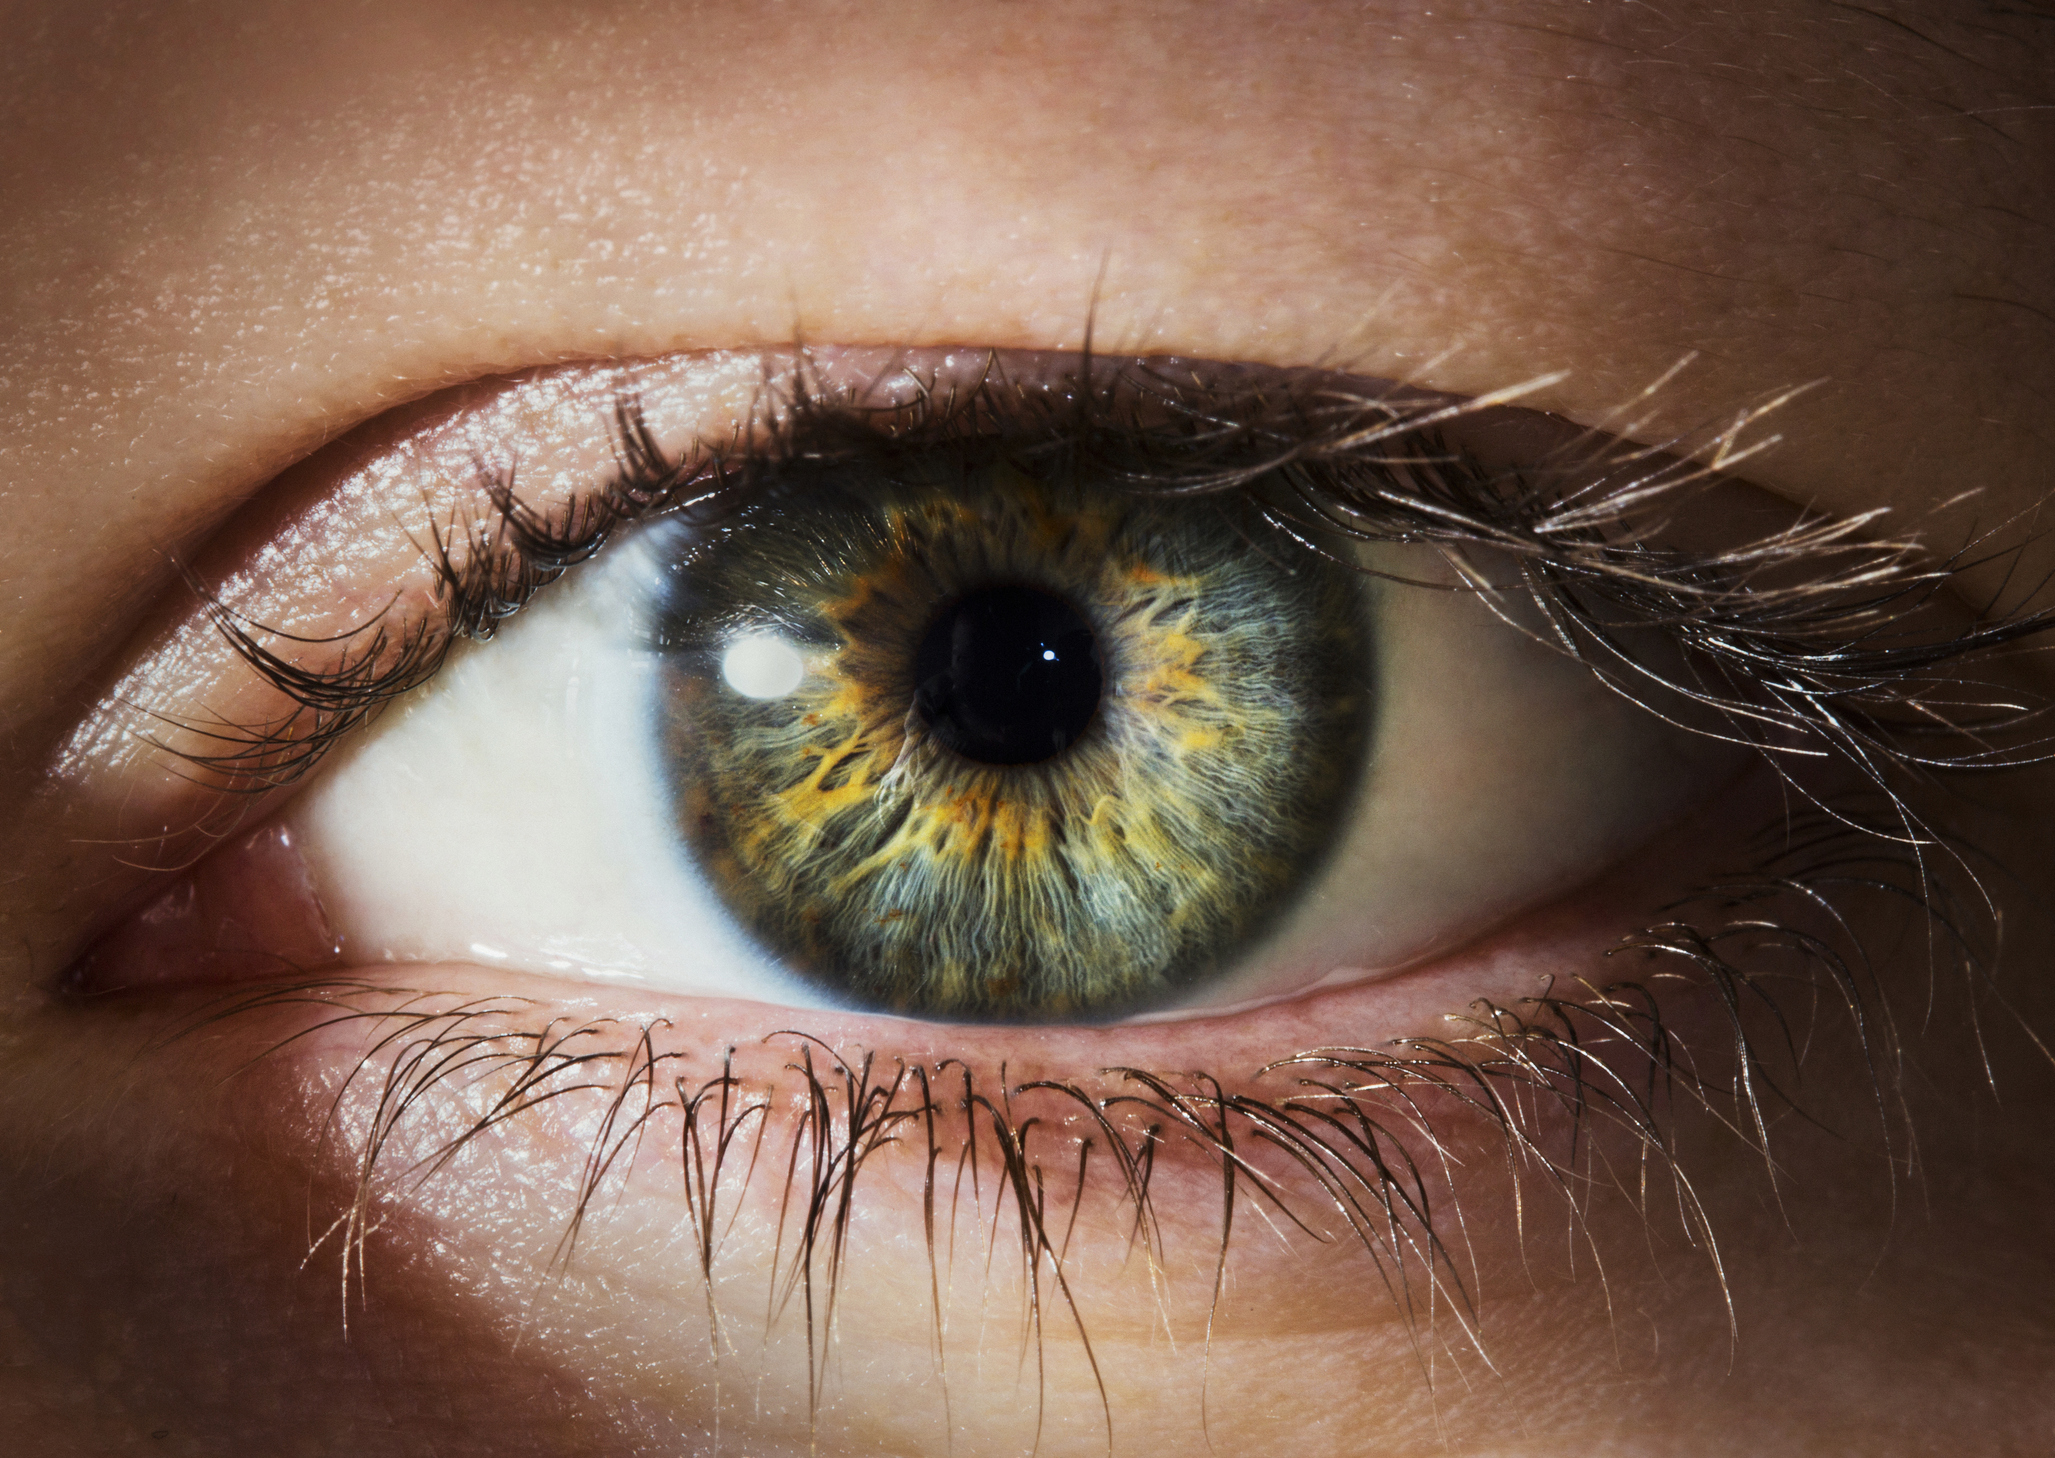 Close-up of a human eye, capturing the intricate details of the iris